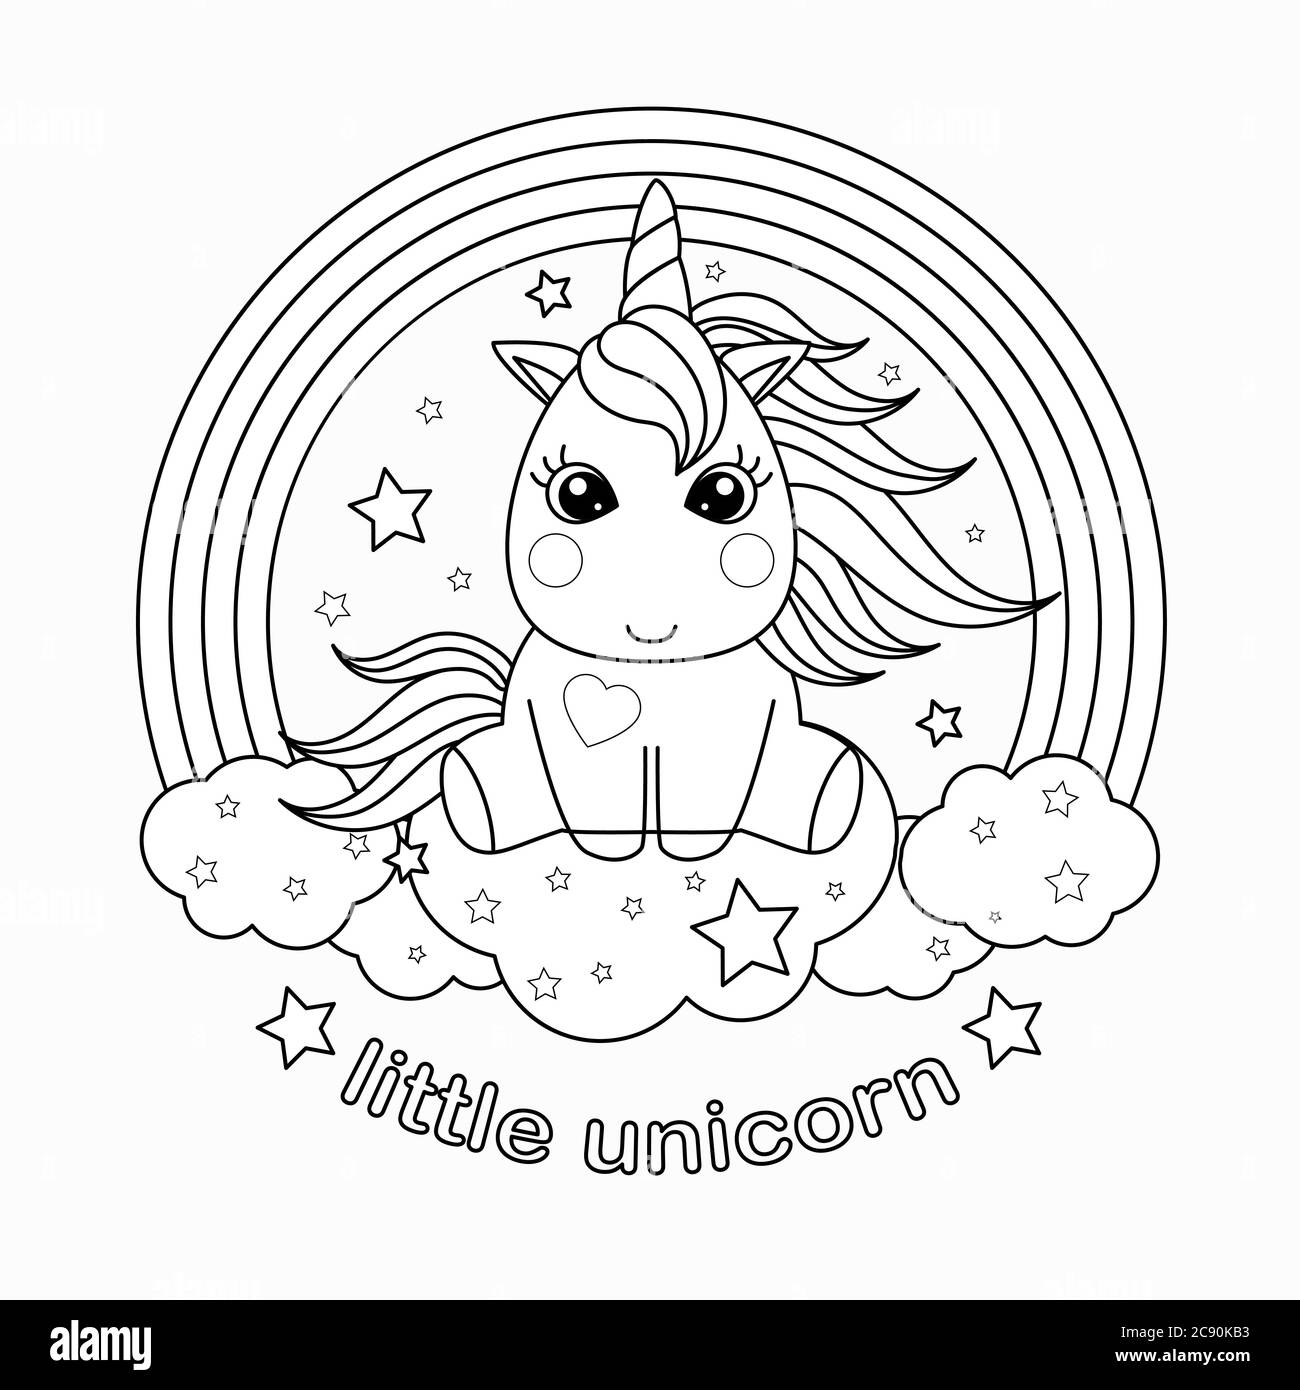 Small, cartoon unicorn. Black and white vector illustration for children's design. coloring, prints, posters, etc. Stock Vector